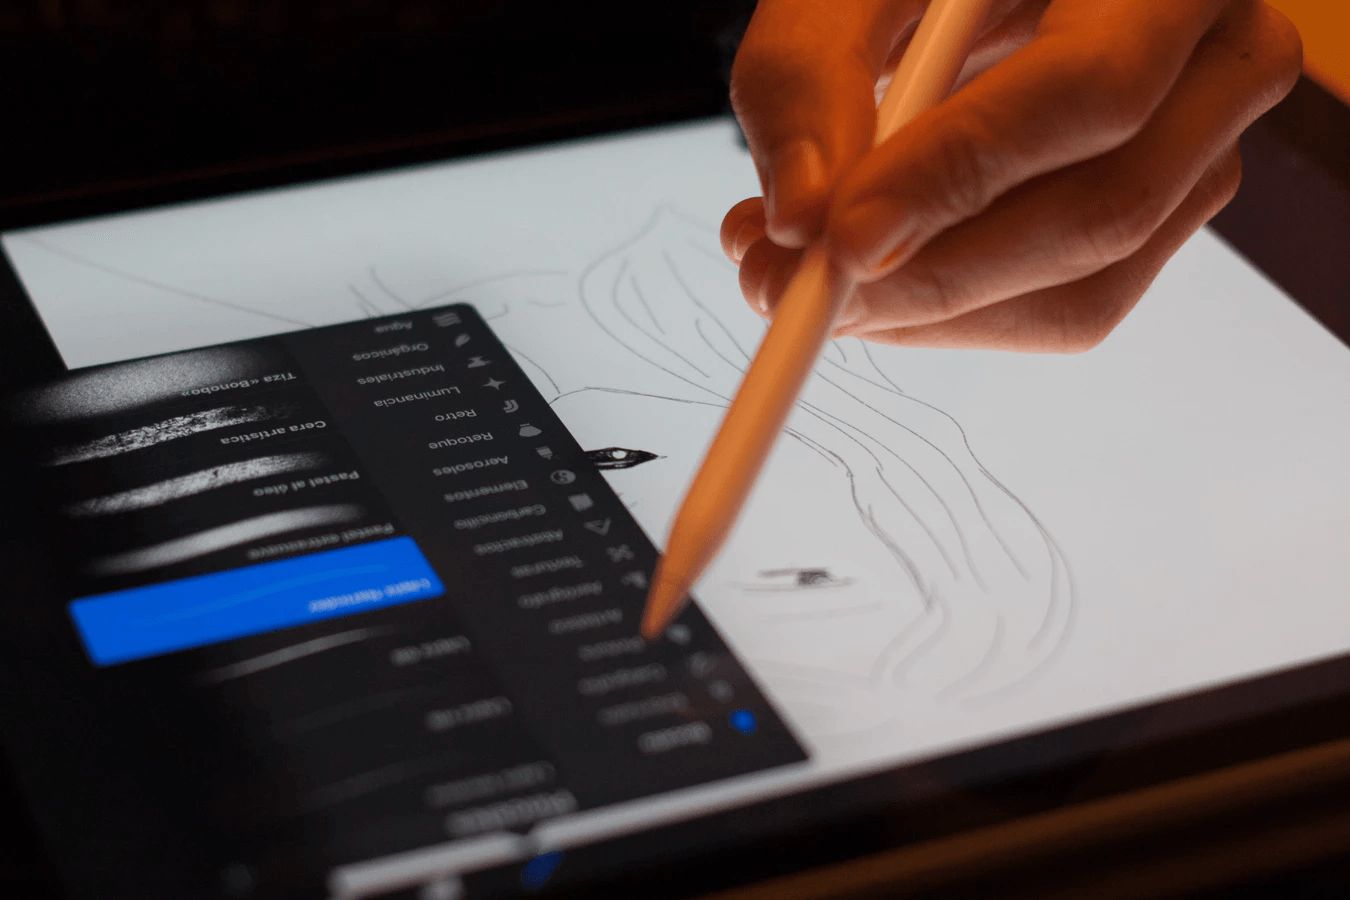 Someone drawing on a tablet.